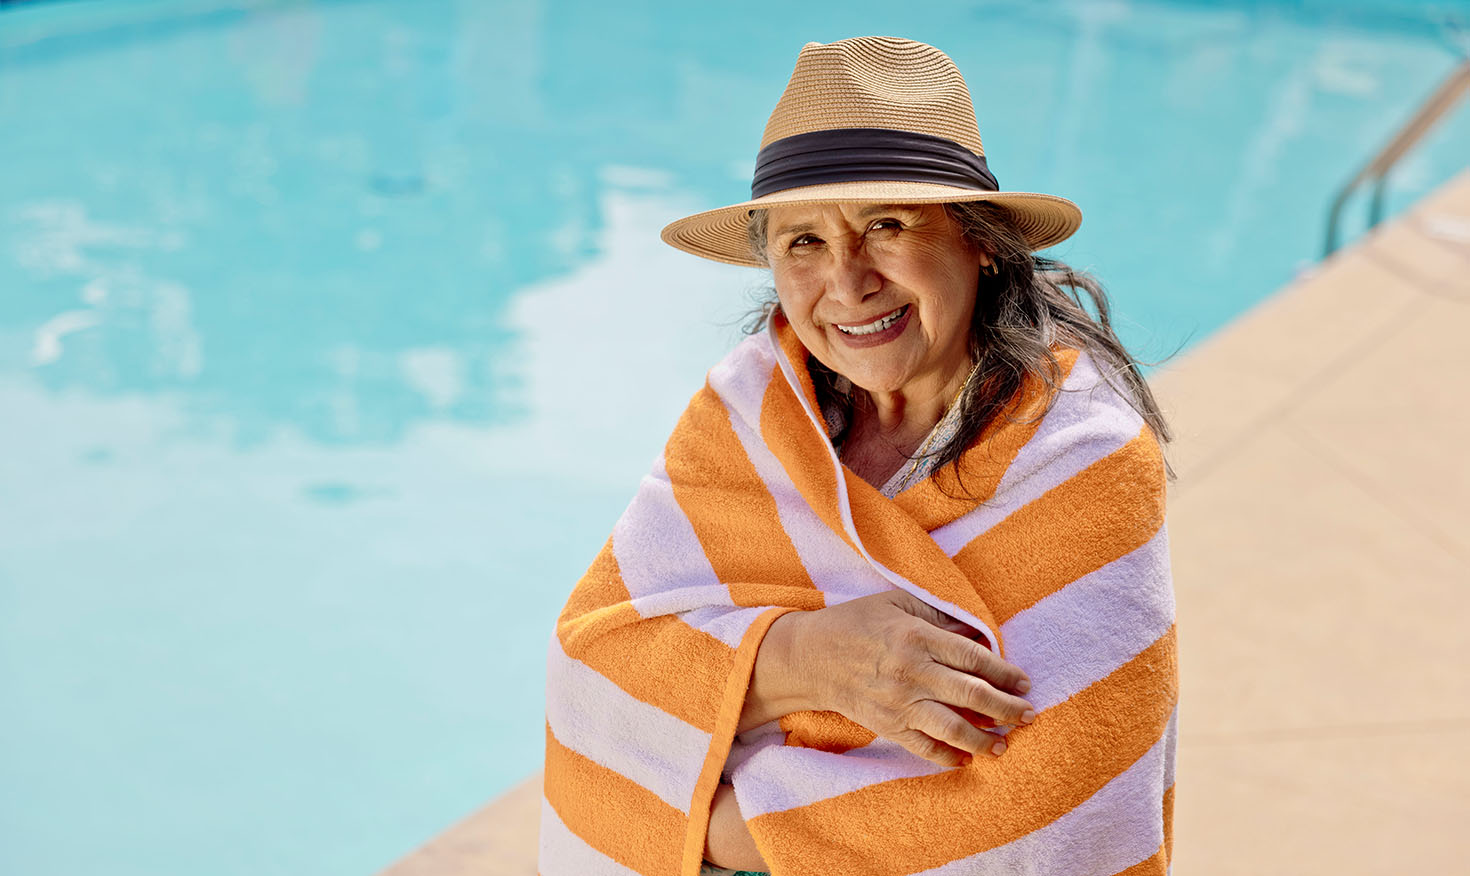 Senior woman in a hat standing by the pool wrapped in an orange and white striped towel